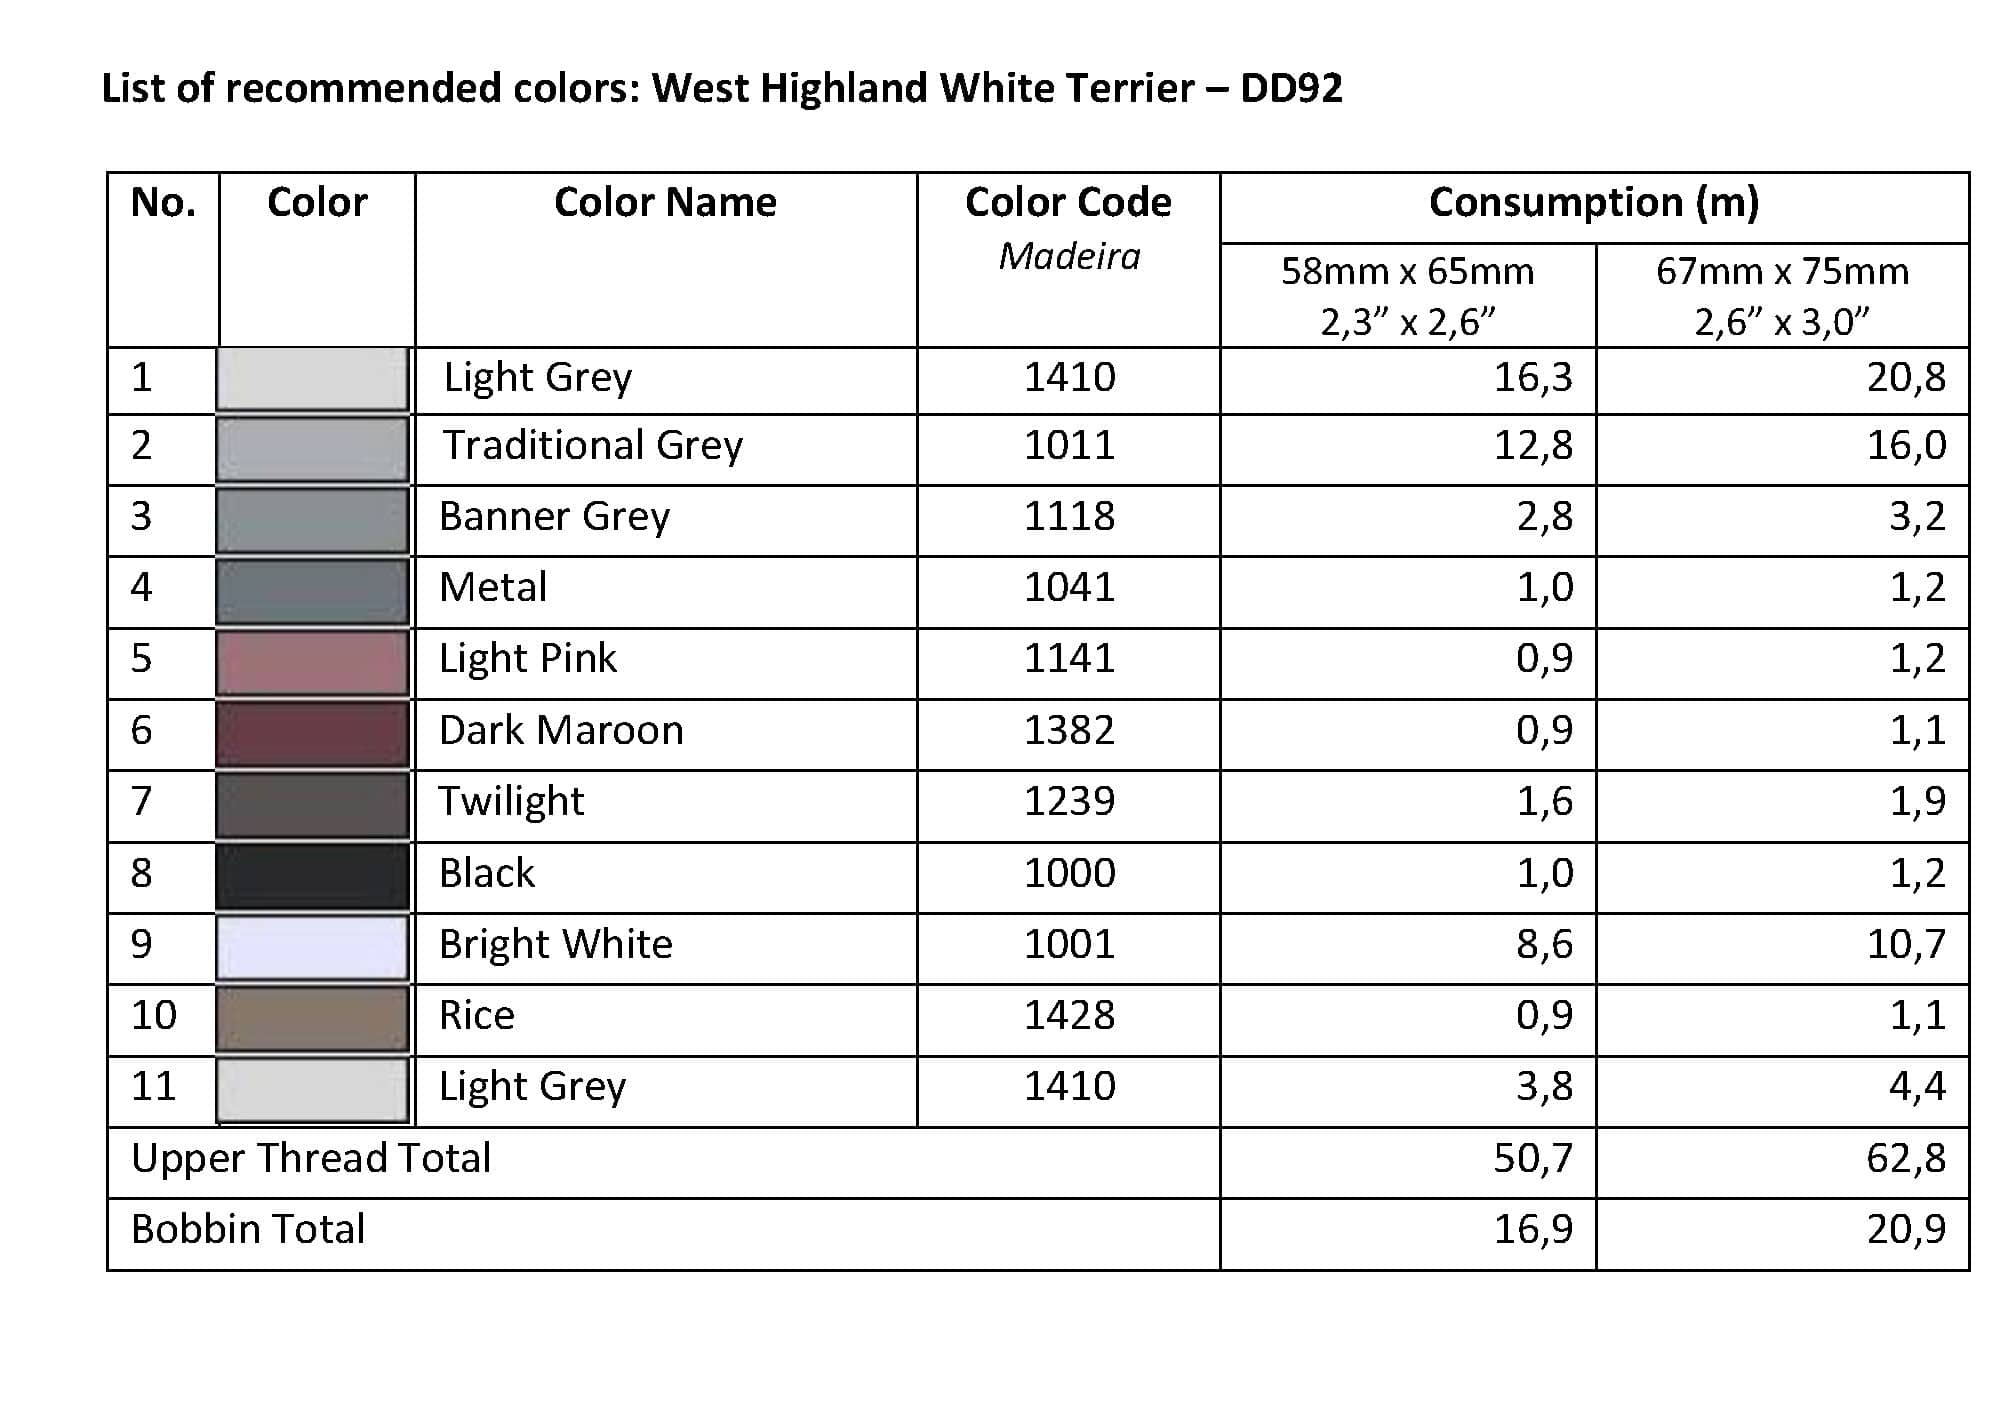 List of Recommended Colors -  West Highland White Terrier DD92